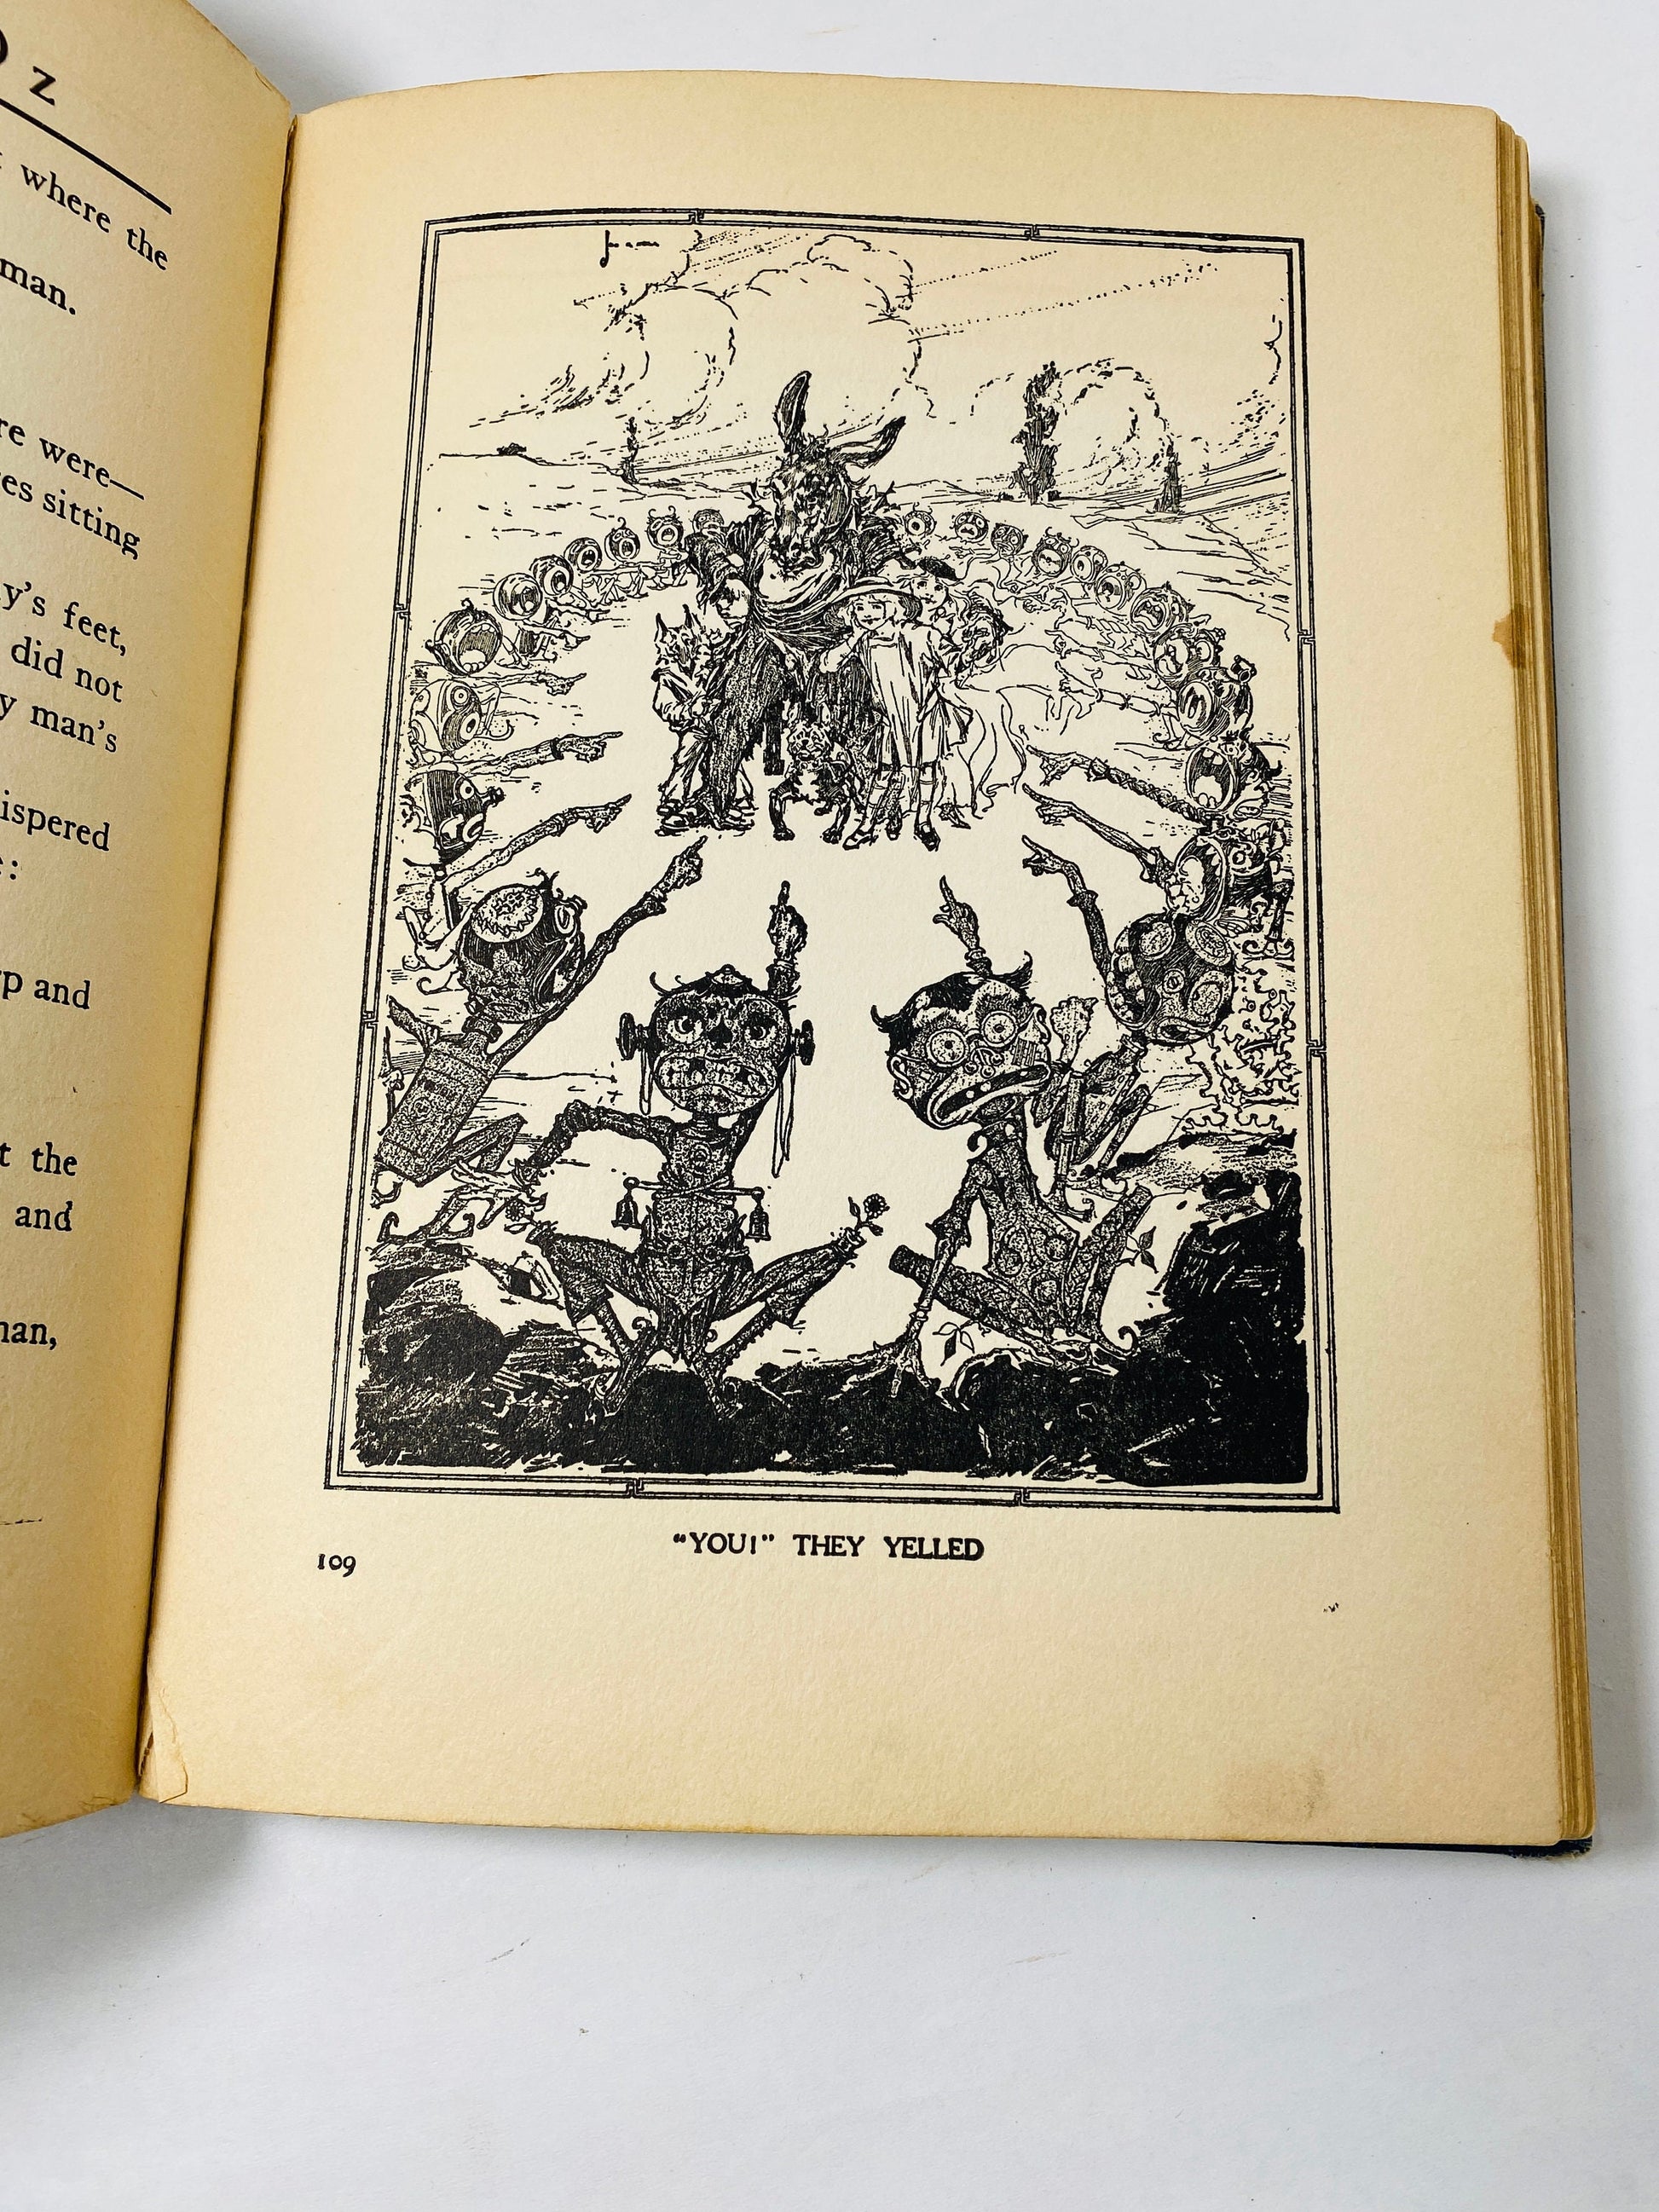 1909 antique Road to Oz vintage book by Frank Baum EARLY EDITION Wizard of Oz series adventure and love Reilly & Lee John R Neill